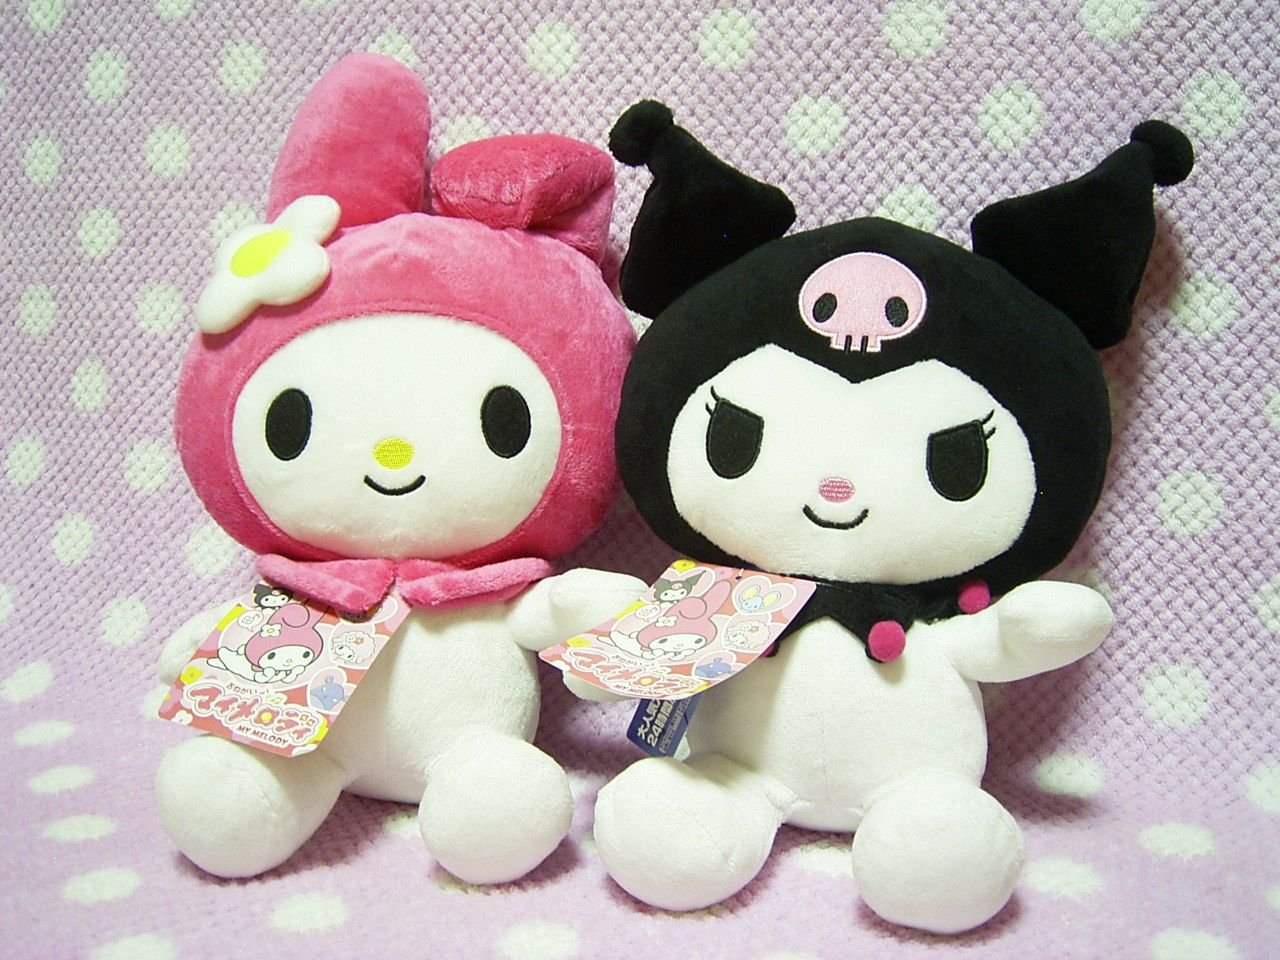 Relationship of Kuromi with My Melody